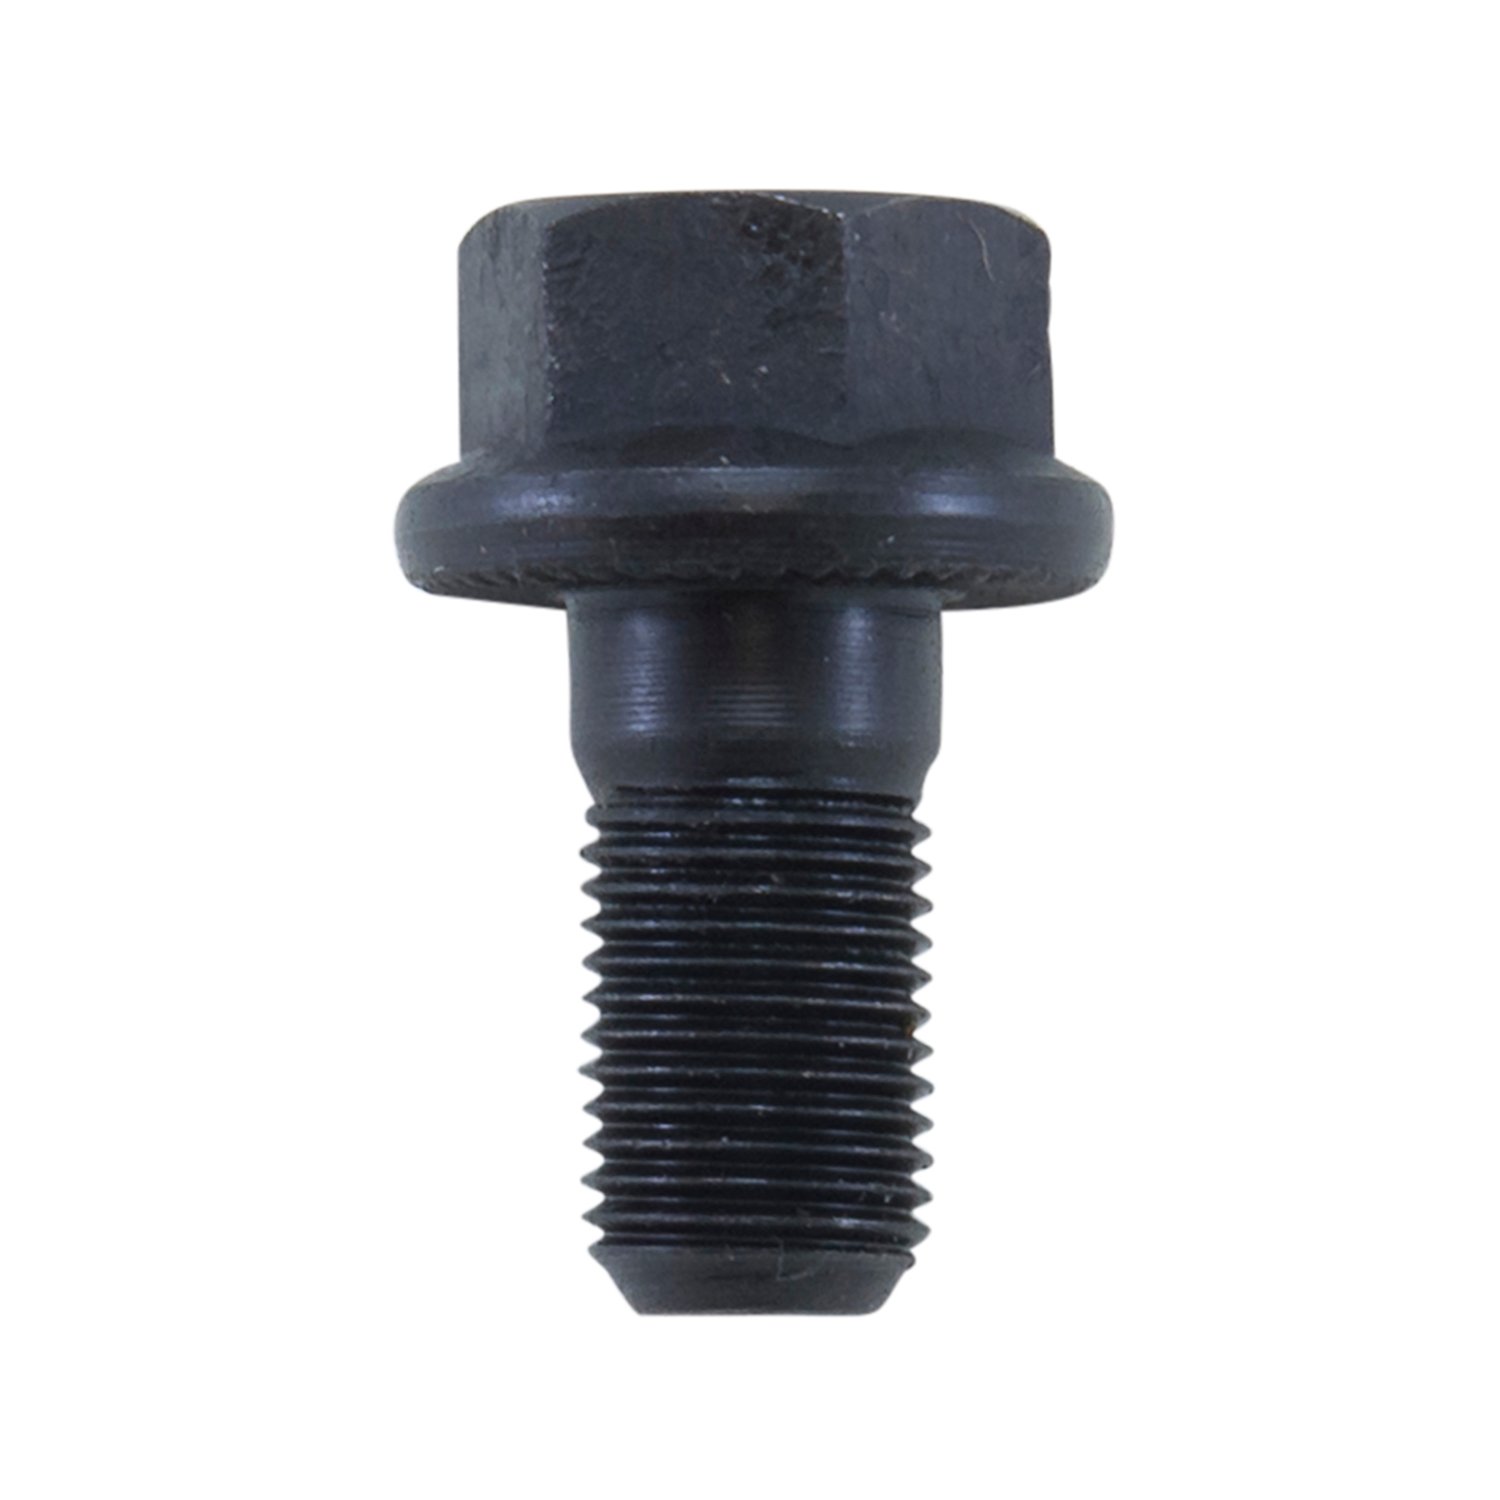 10.5 in. Aam & 11.5 in. Aam Dodge Ring Gear Bolt, Right Hand Thread, M14 X 1.480 in. Long